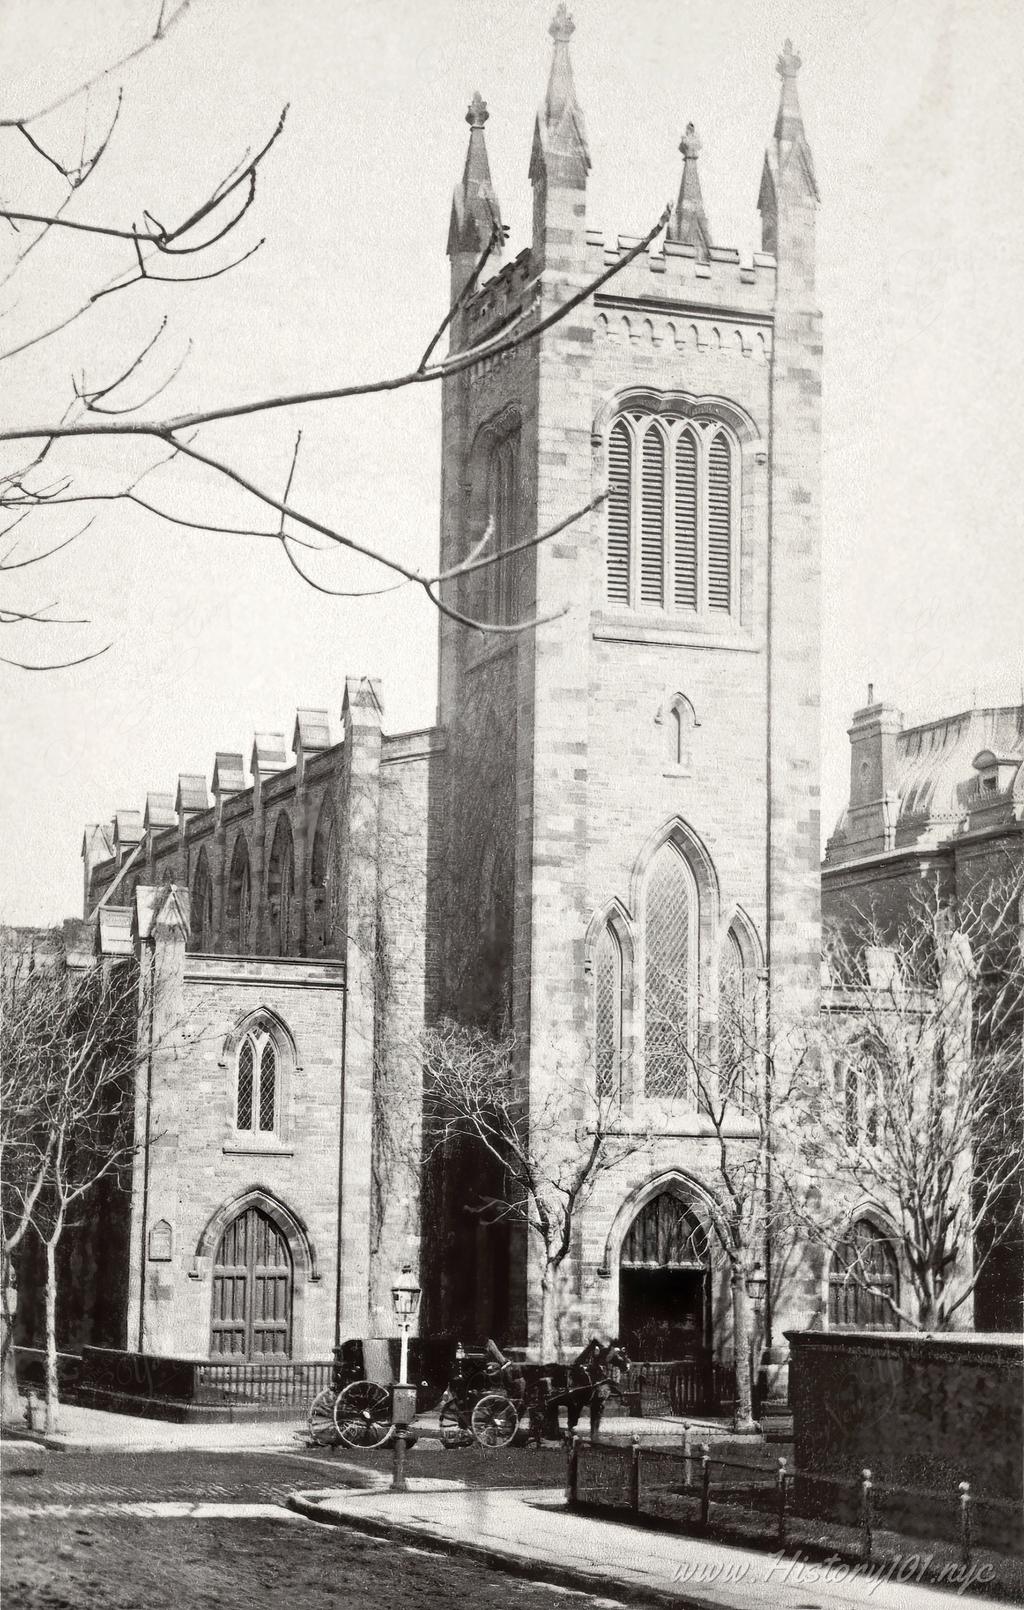 Discover the Church of the Ascension, an 1841 Gothic Revival gem, and its role in shaping Fifth Avenue and Manhattan's architectural heritage